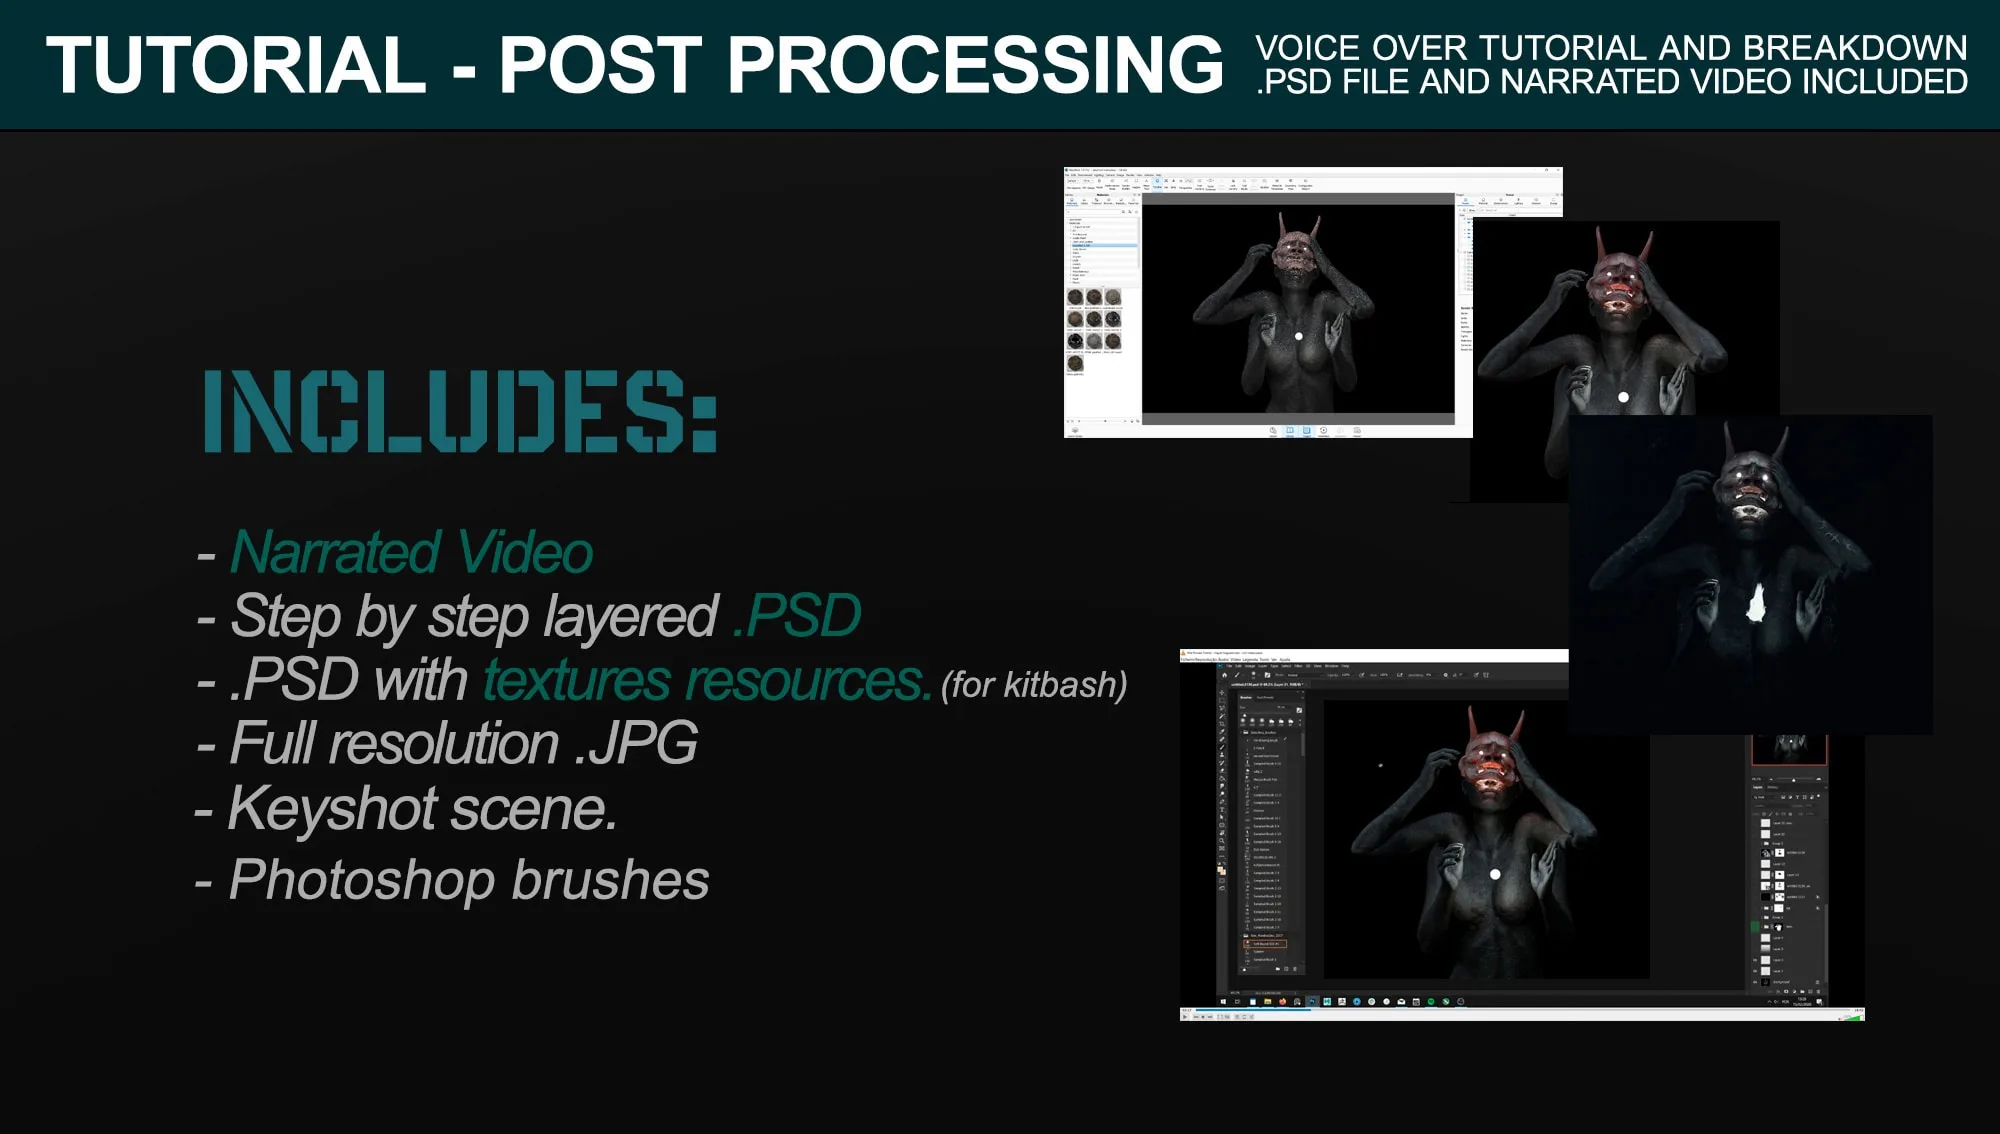 Improve Your Post-Processing